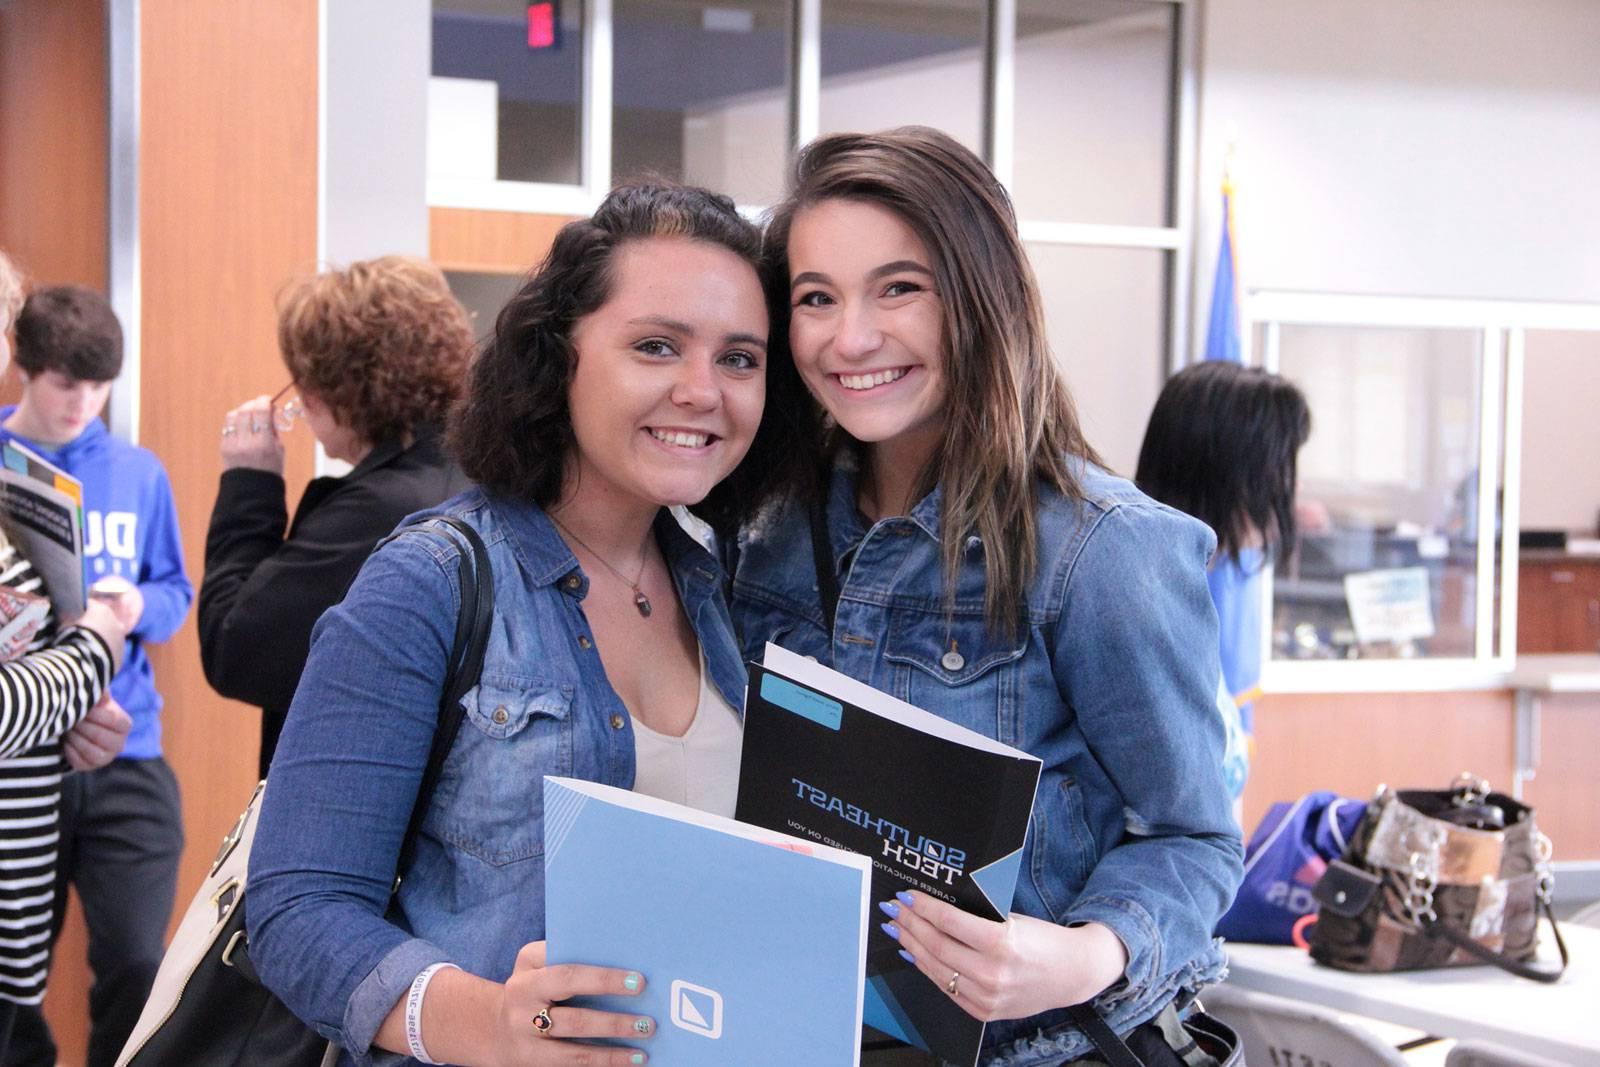 Two students at career fair